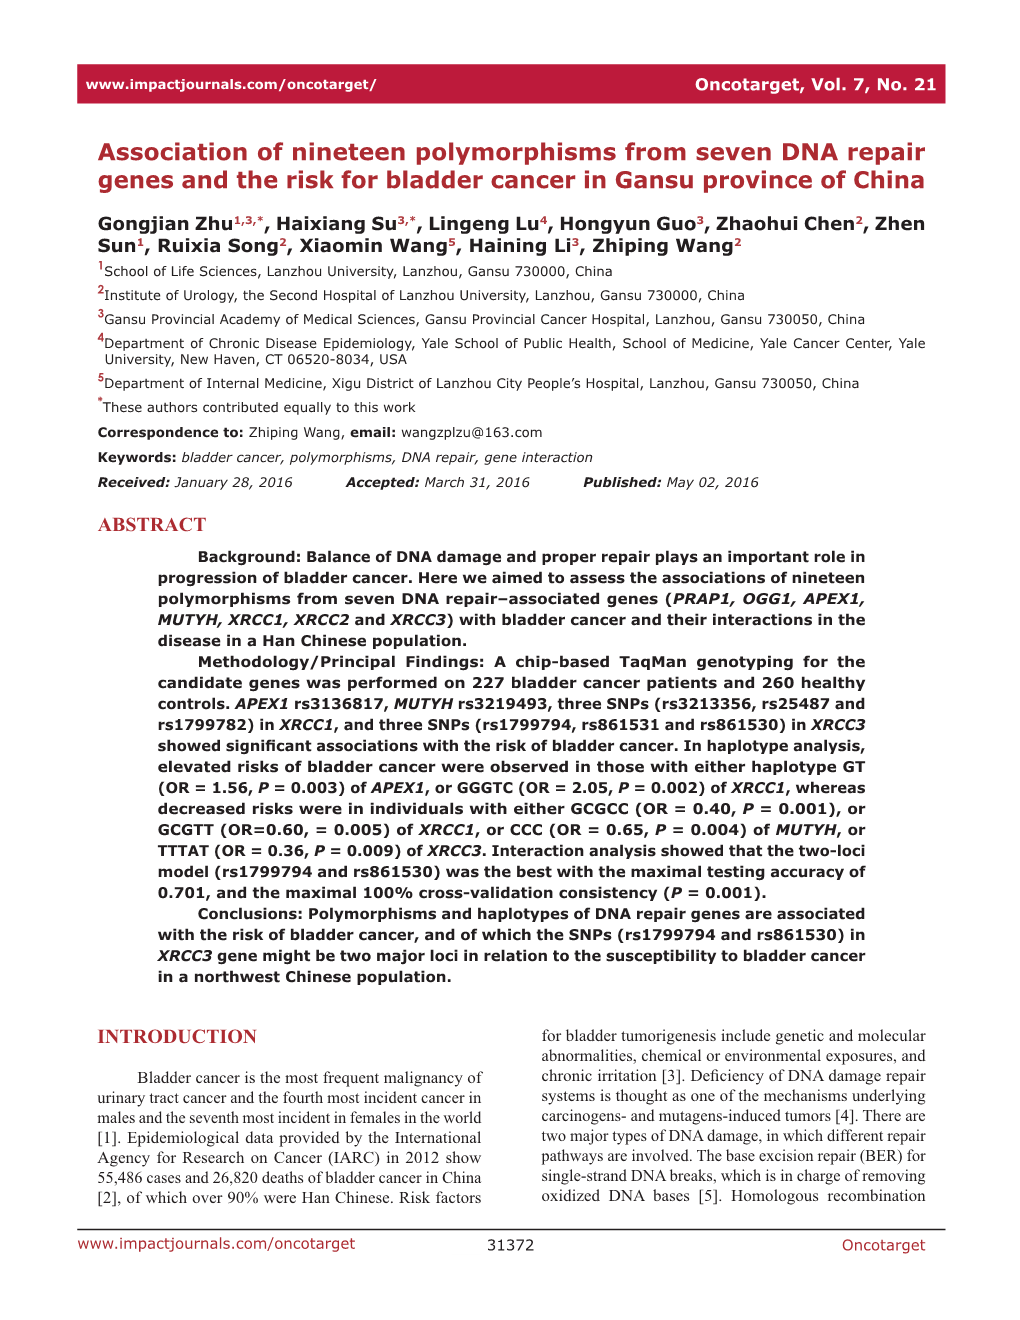 Association of Nineteen Polymorphisms from Seven DNA Repair Genes and the Risk for Bladder Cancer in Gansu Province of China